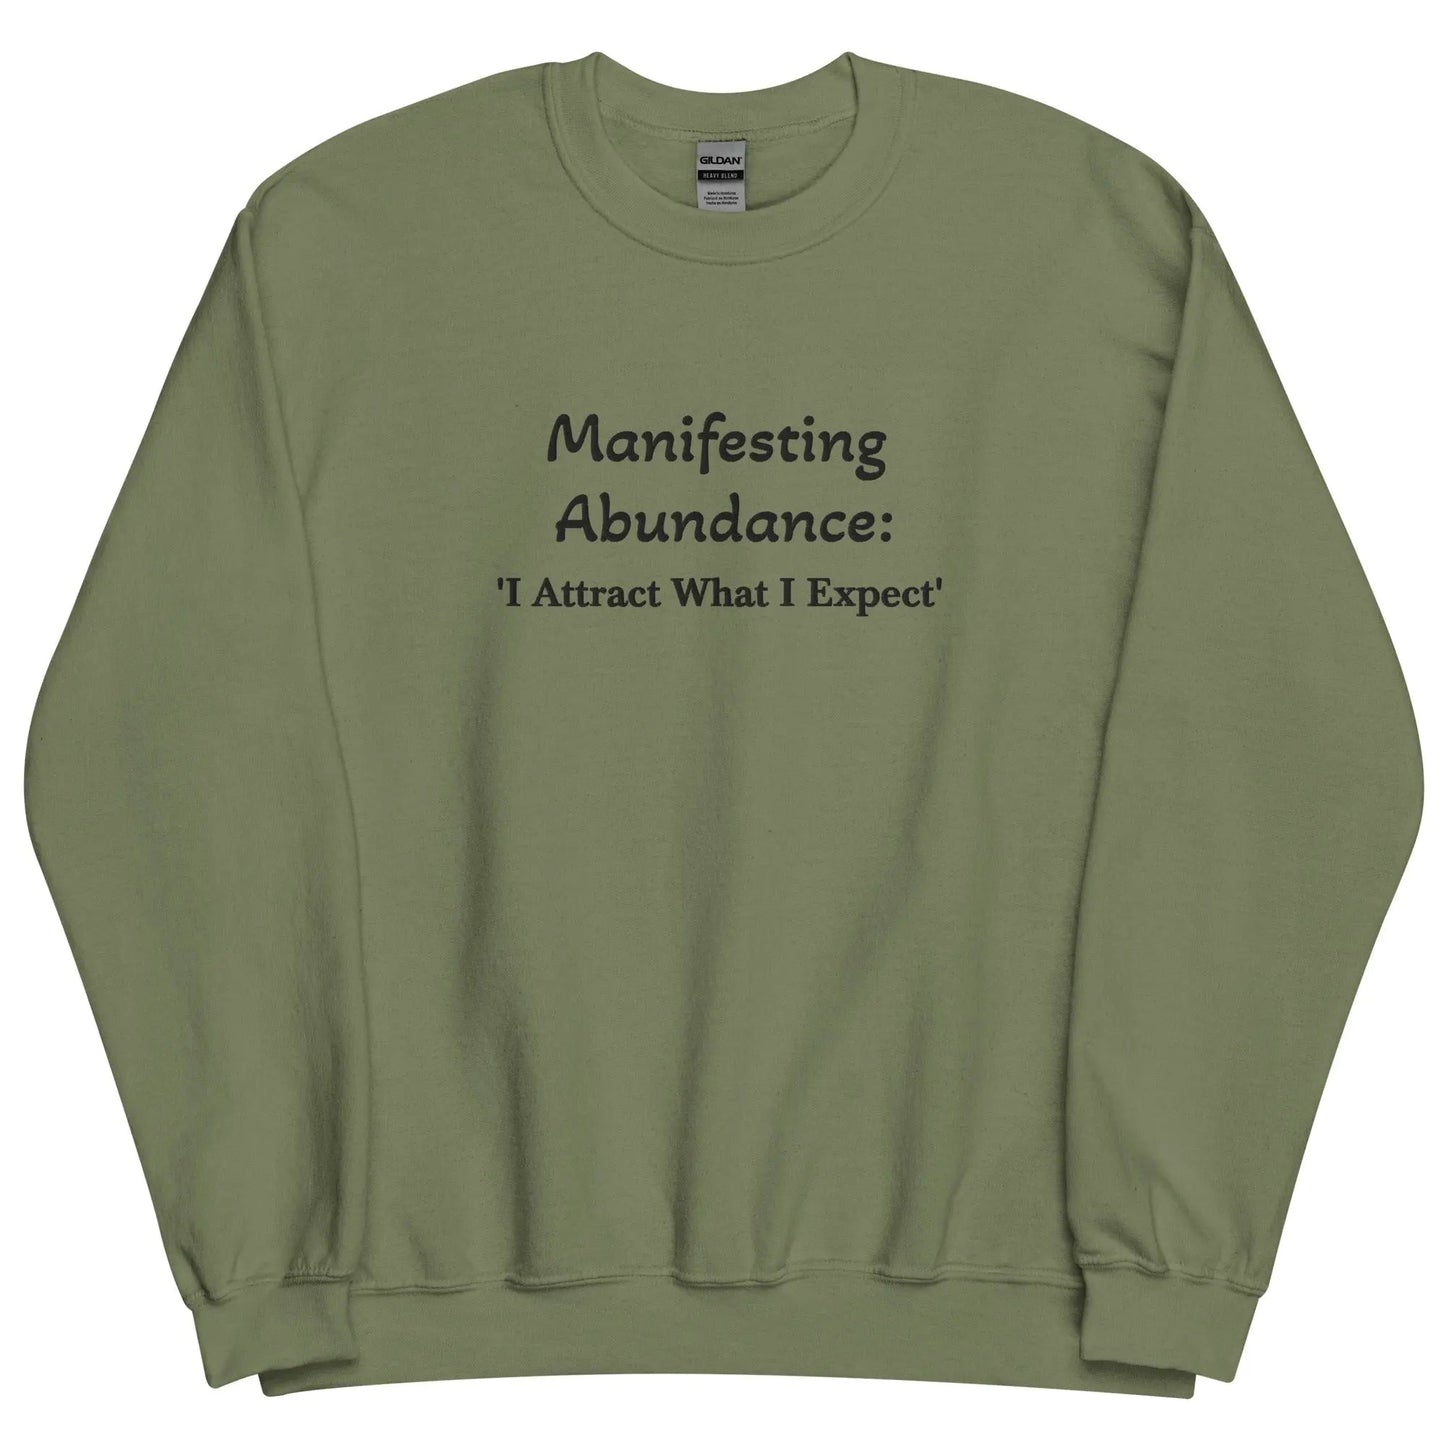 Embroidered Manifesting Abundance: 'I Attract What I Expect' Crewneck Sweatshirt-clothes- sweater-Military Green-S-mysticalcherry